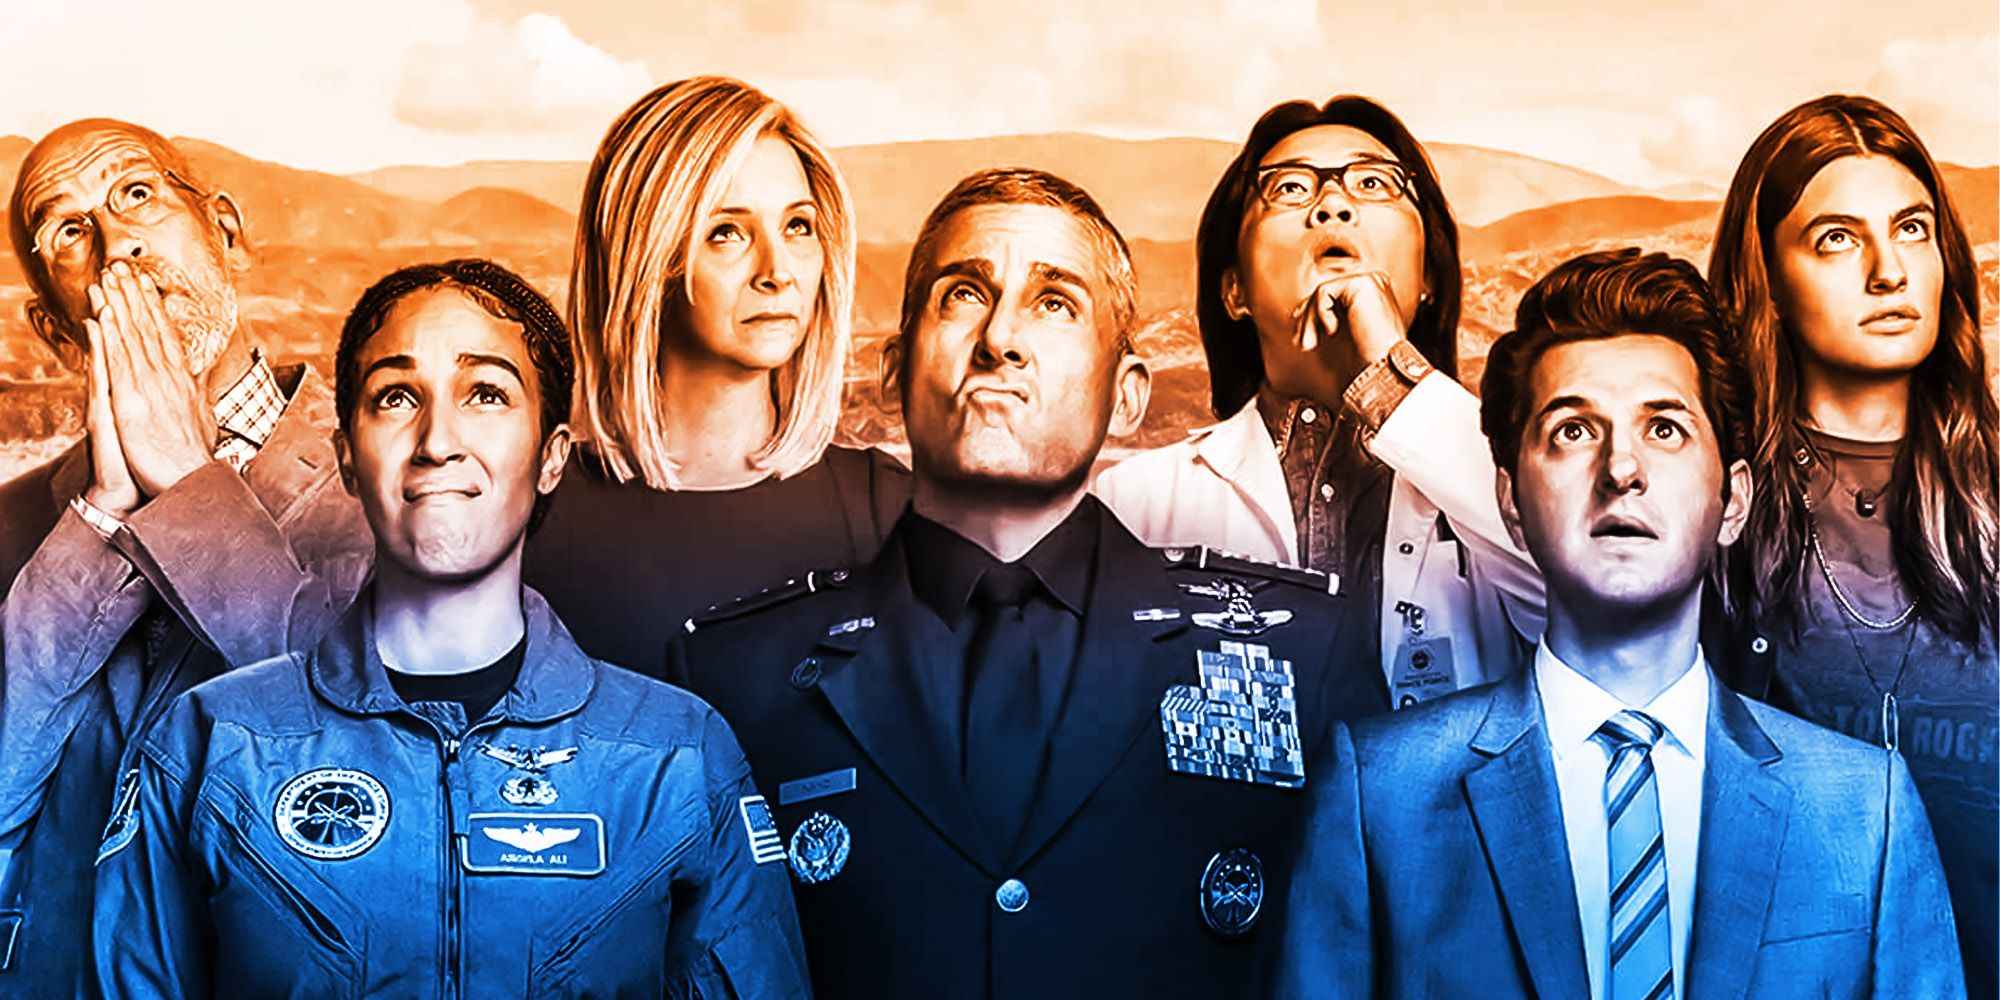 Space force season 2 cast character and cameo guide